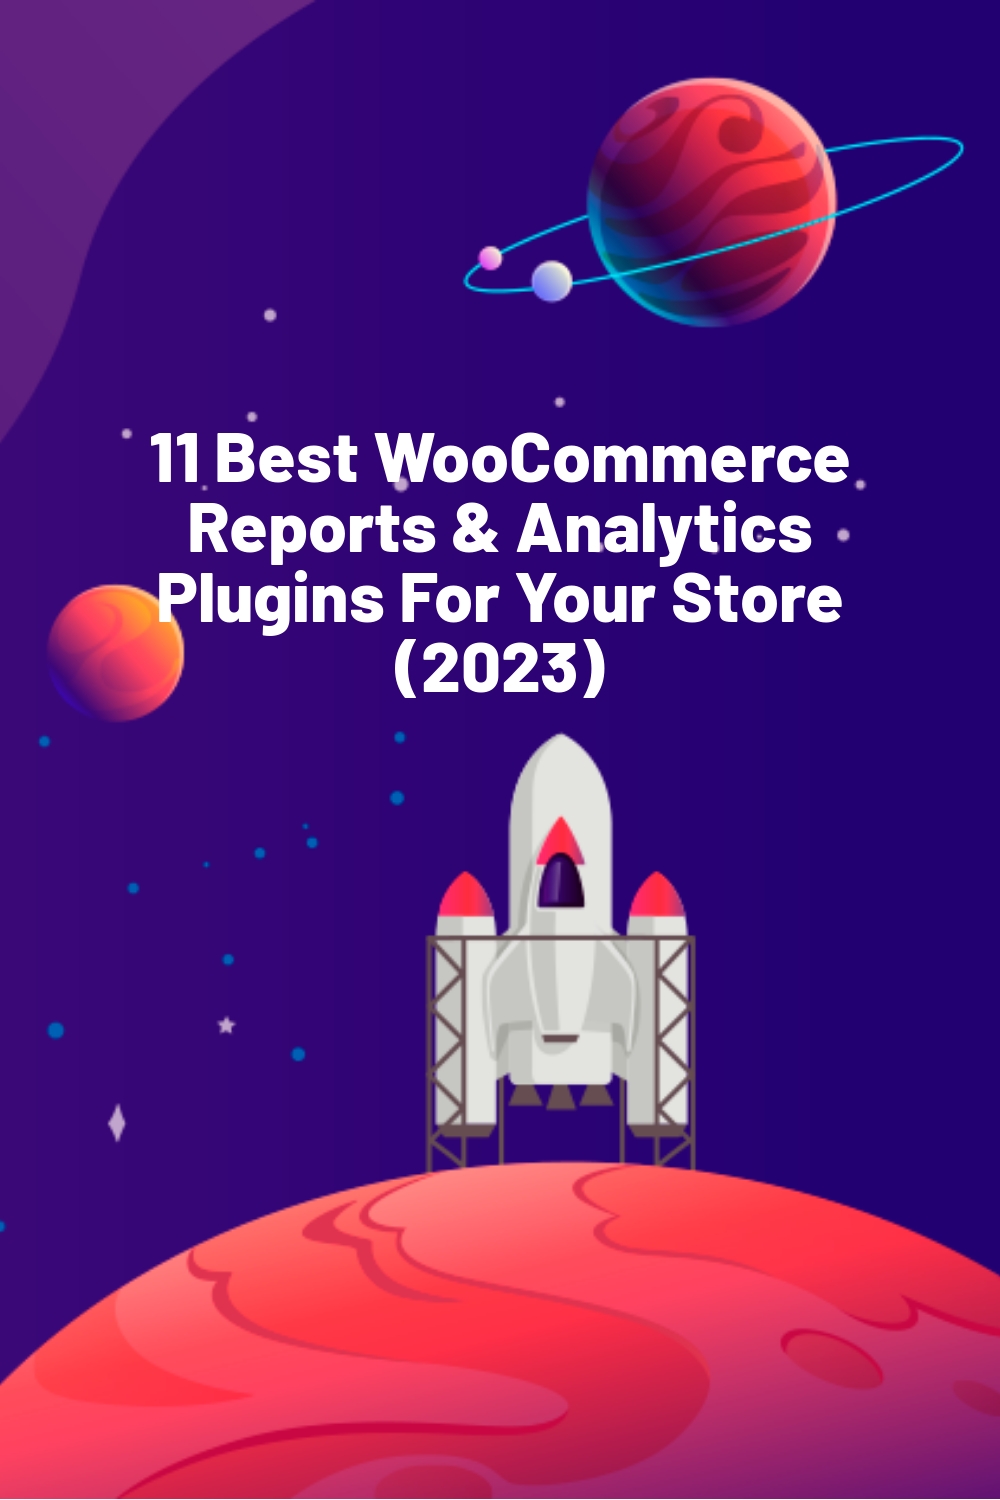 11 Best WooCommerce Reports & Analytics Plugins For Your Store (2023)